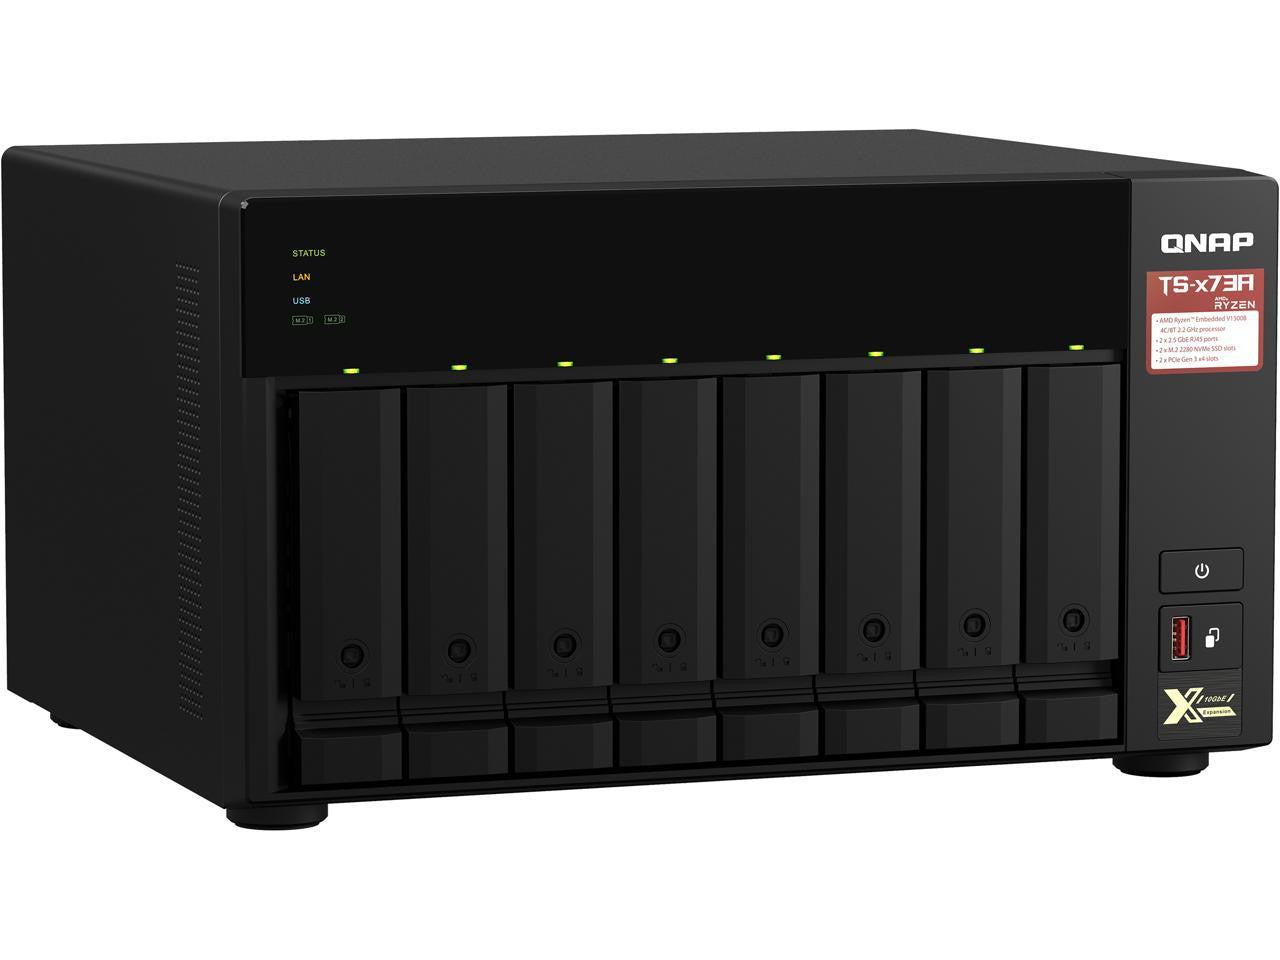 QNAP TS-873A 8-BAY NAS with 32GB DDR4 RAM and 24TB (8x3TB) Western Digital RED PLUS Drives Fully Assembled and Tested